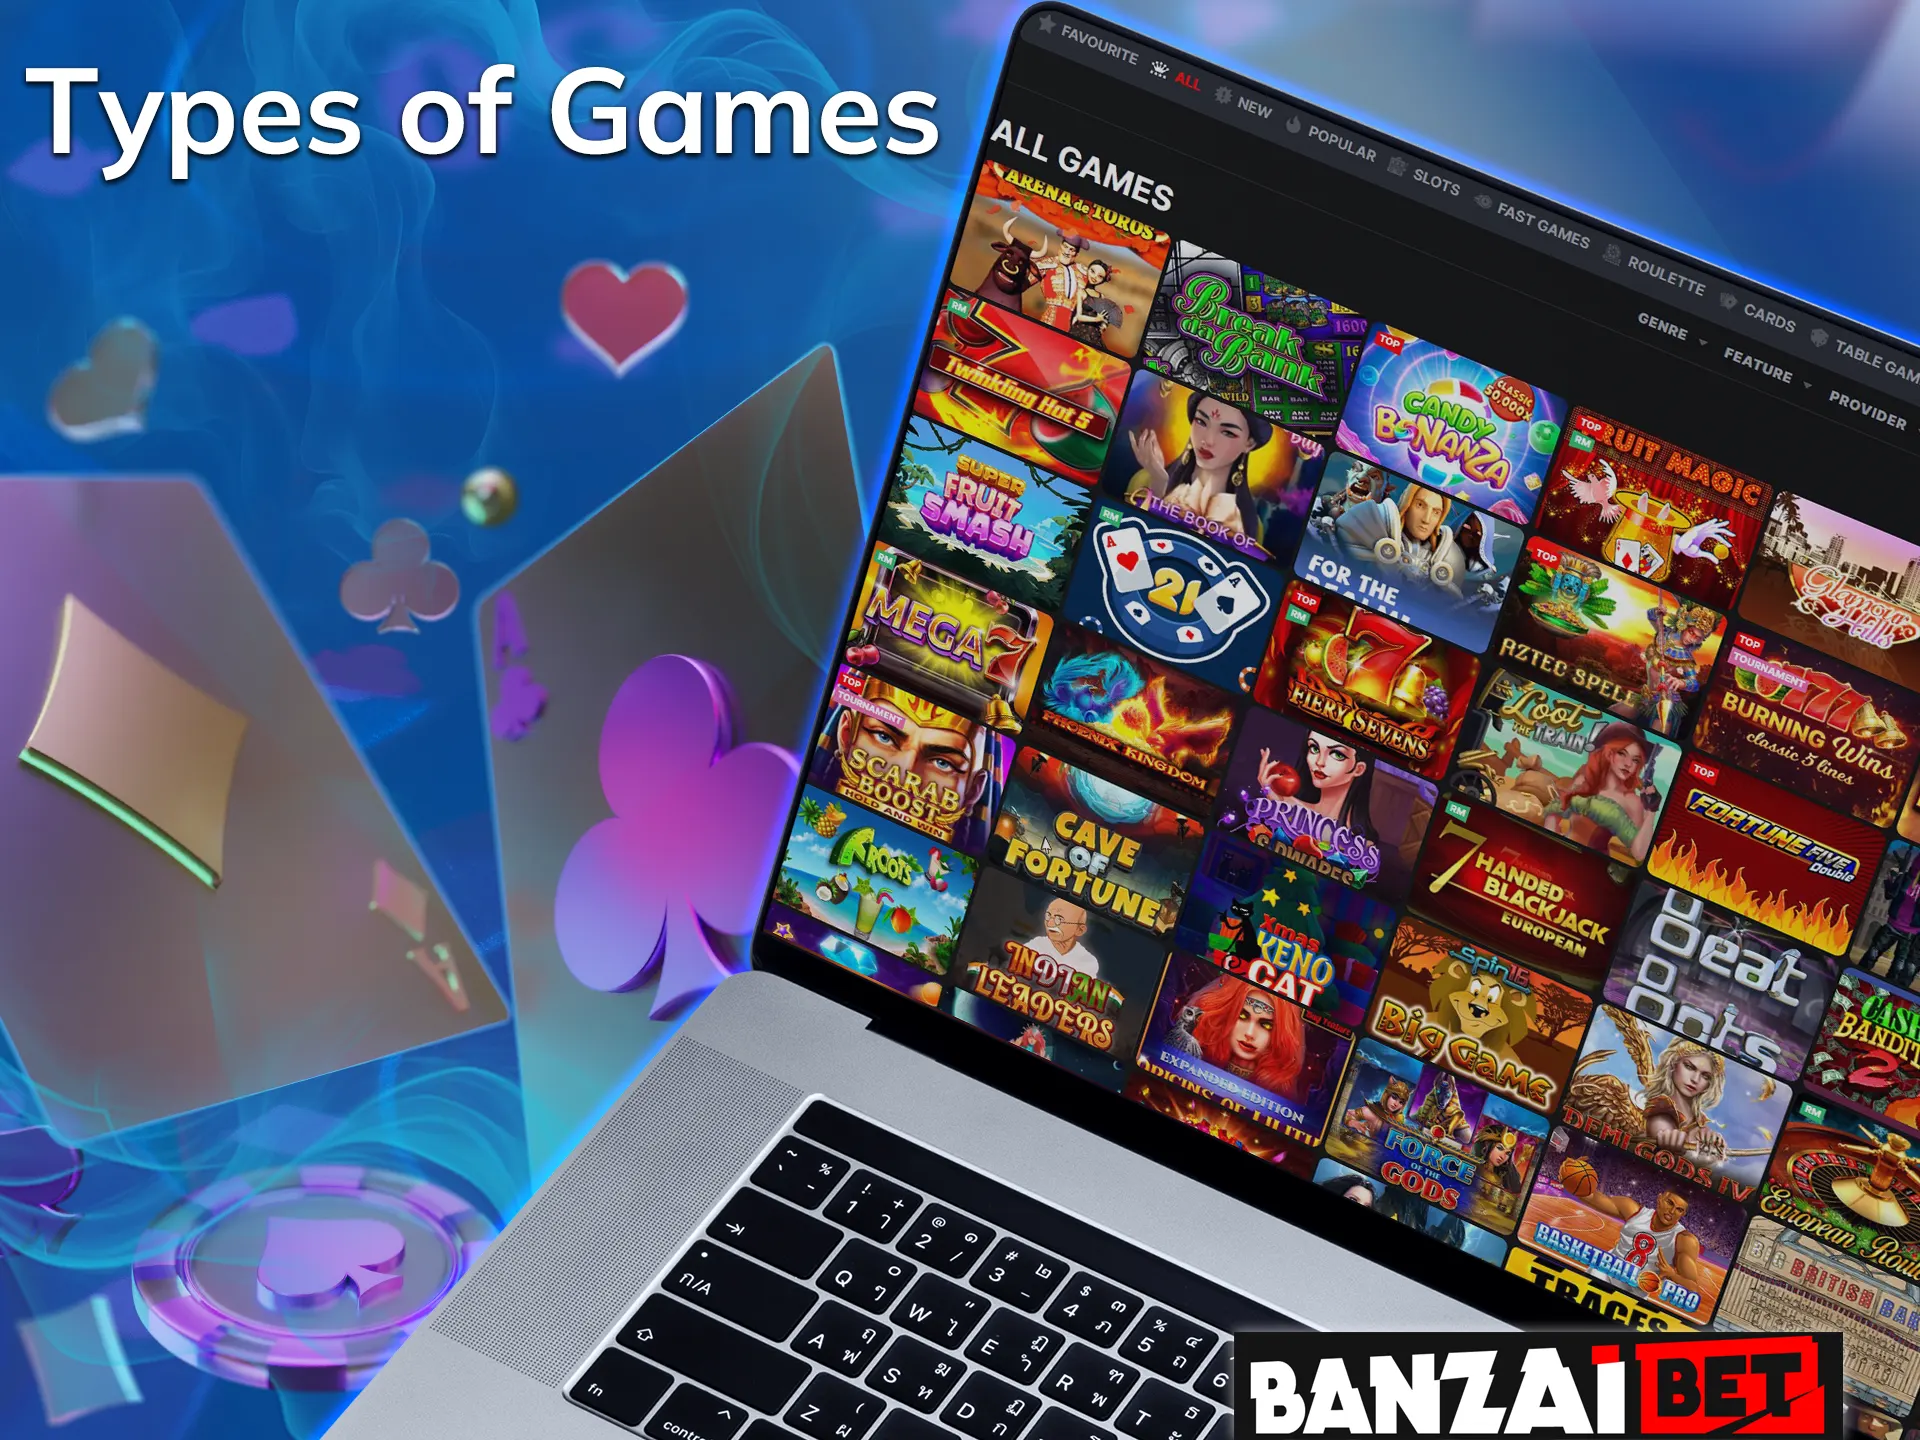 The Banzai Bet website offers a wide range of game types.